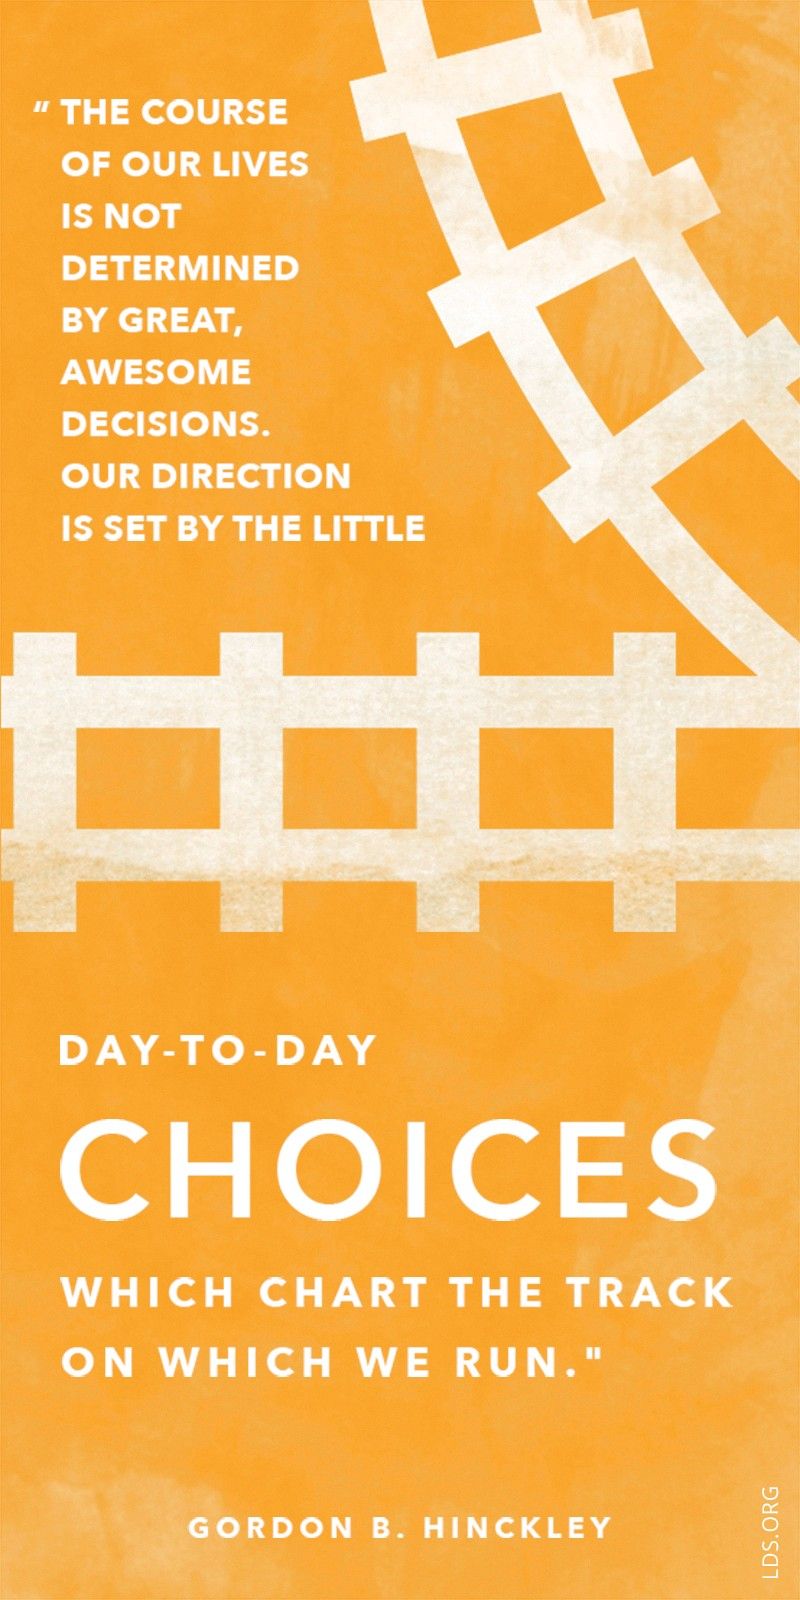 “The course of our lives is not determined by great, awesome decisions. Our direction is set by the little day-to-day choices which chart the track on which we run.”—President Gordon B. Hinckley, “Watch the Switches in Your Life”